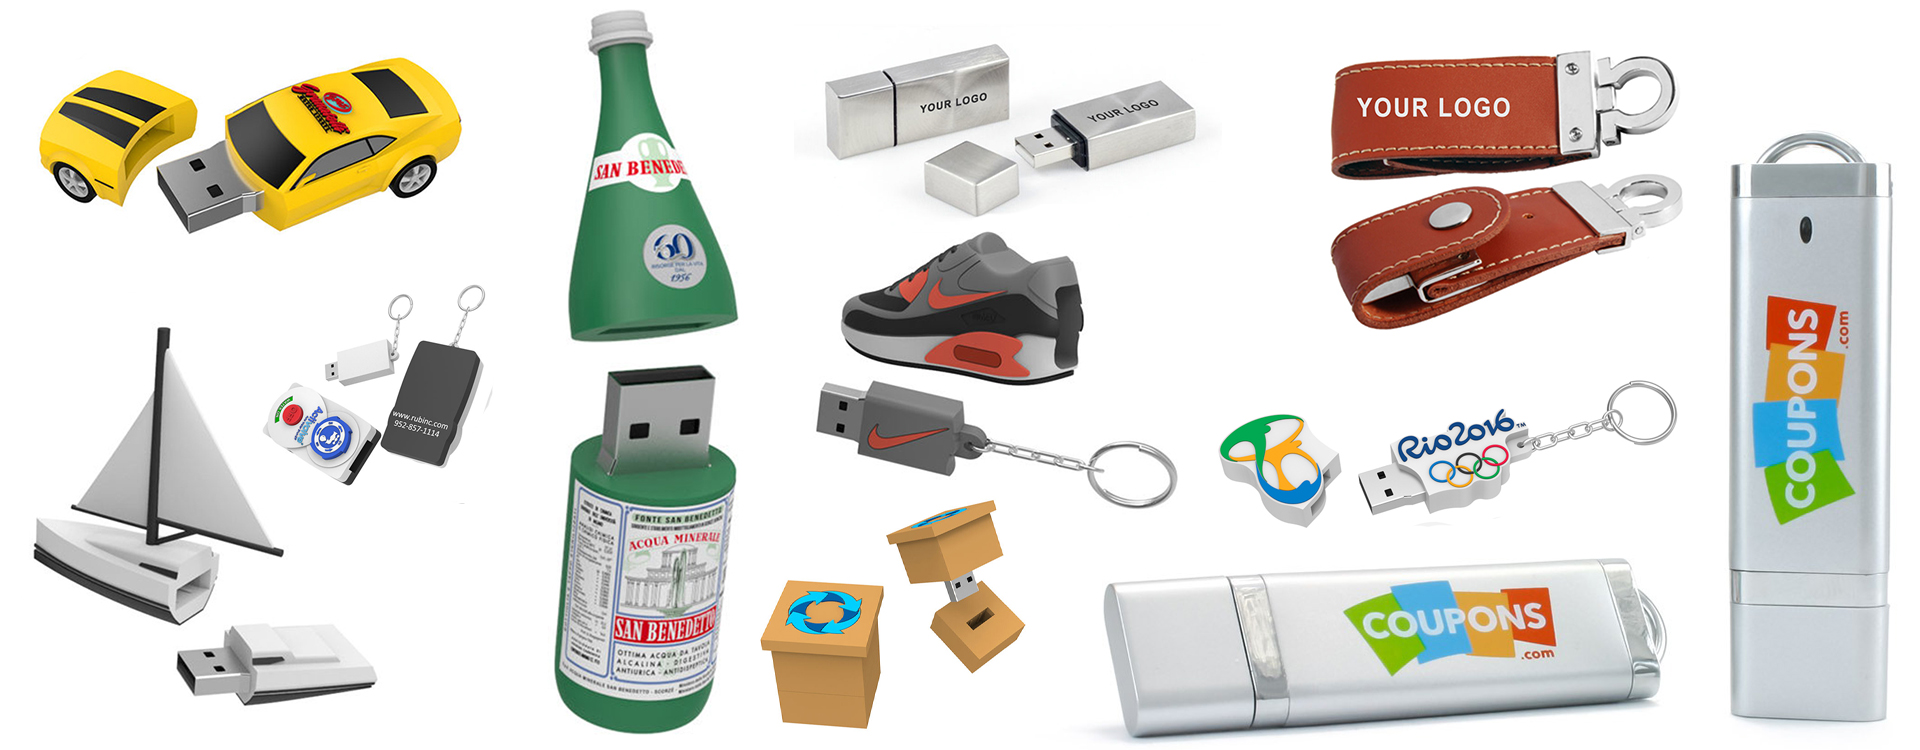 All kinds of Technology product promotional gift items